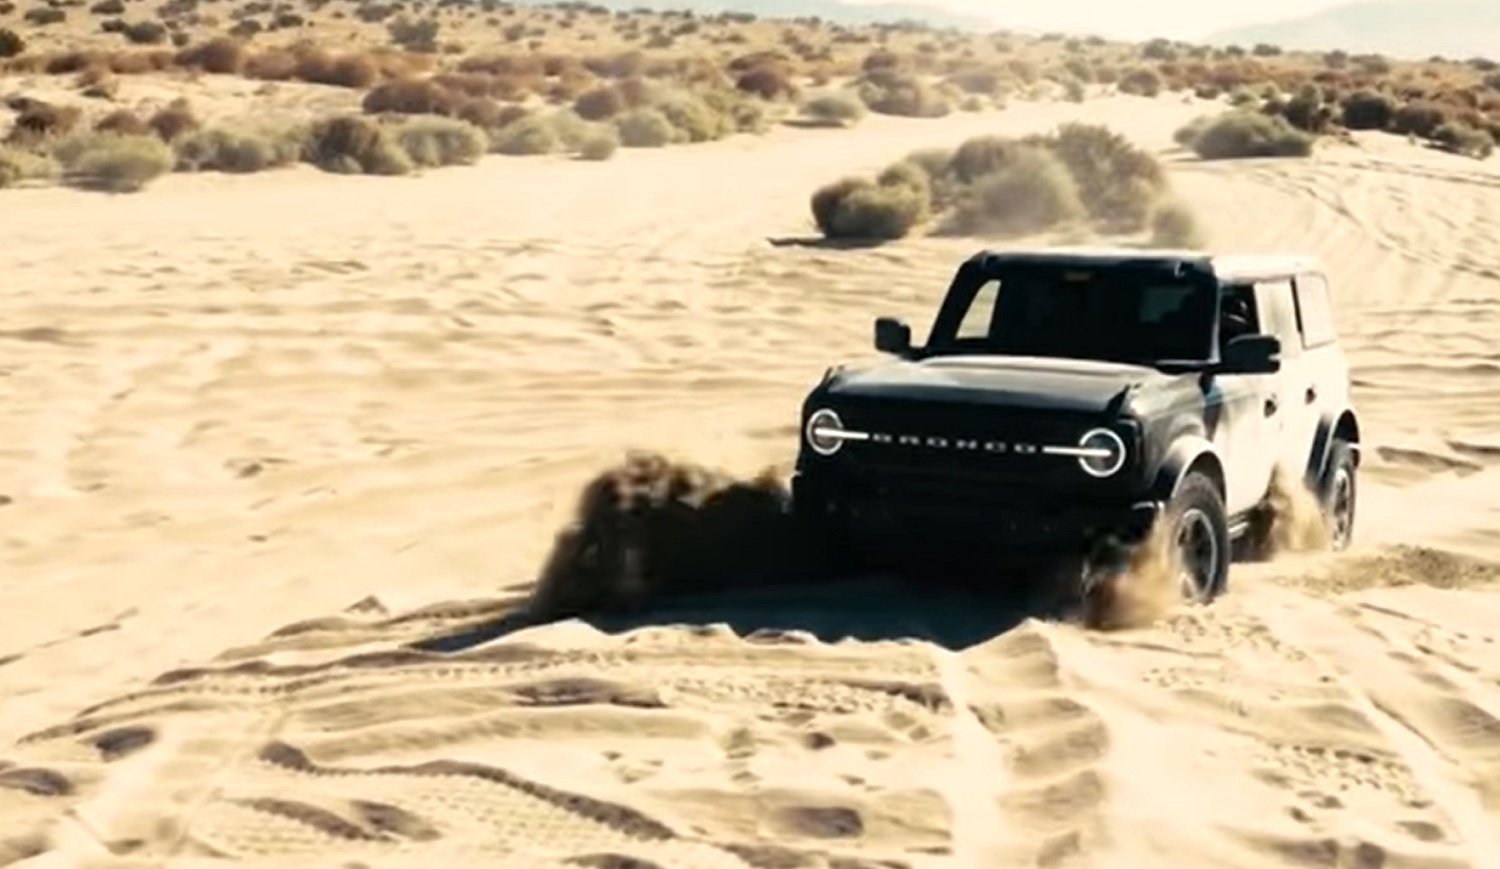 Jeep teases V8-powered Wrangler, confirms its production